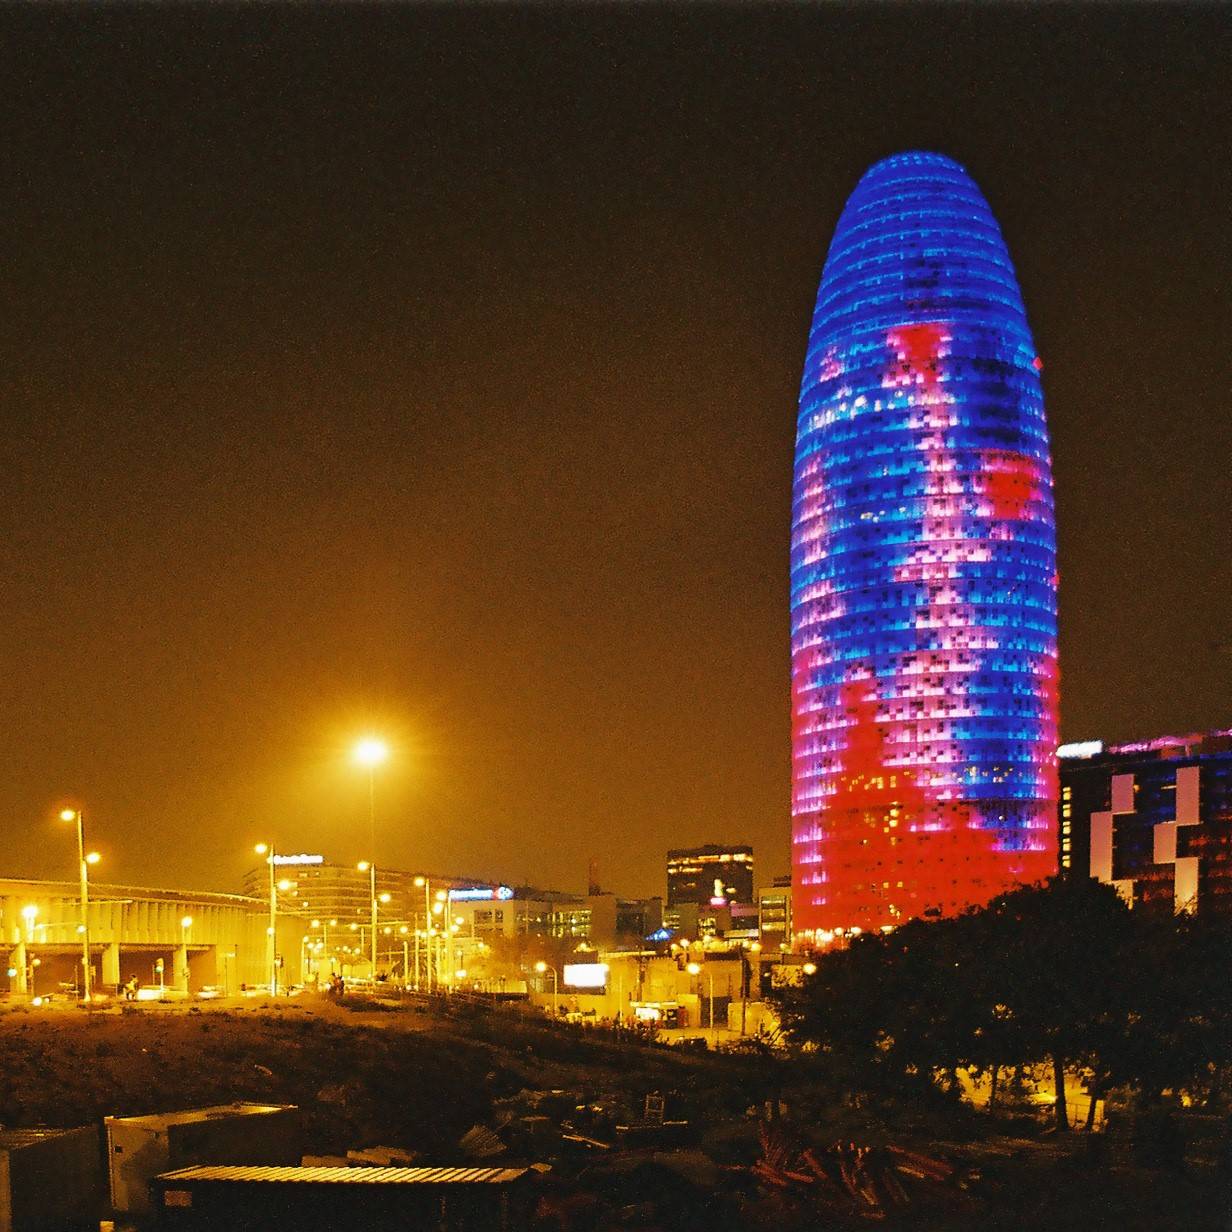 Barcelona’s iconic tower deserted by tenants who see it as impractical and ‘bad luck’